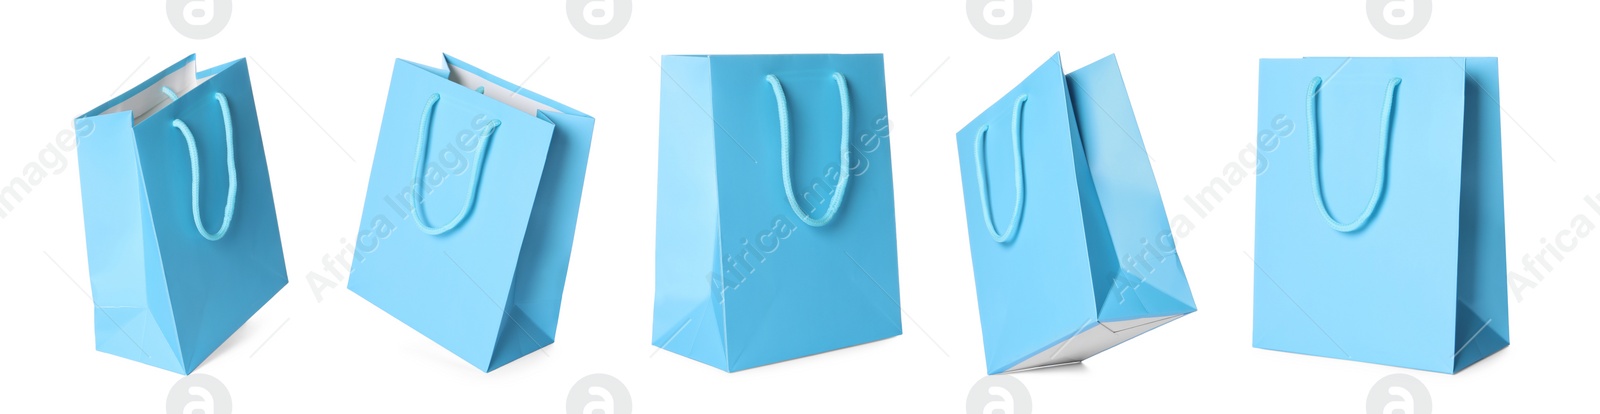 Image of Light blue shopping bag isolated on white, different sides